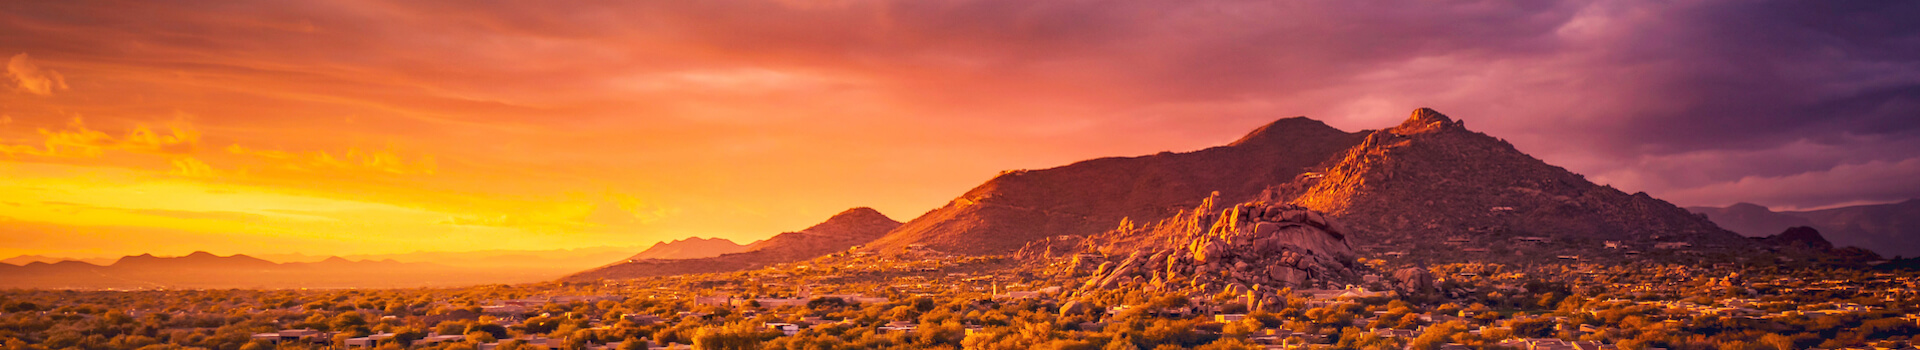 Mountain in Scottsdale at sunset